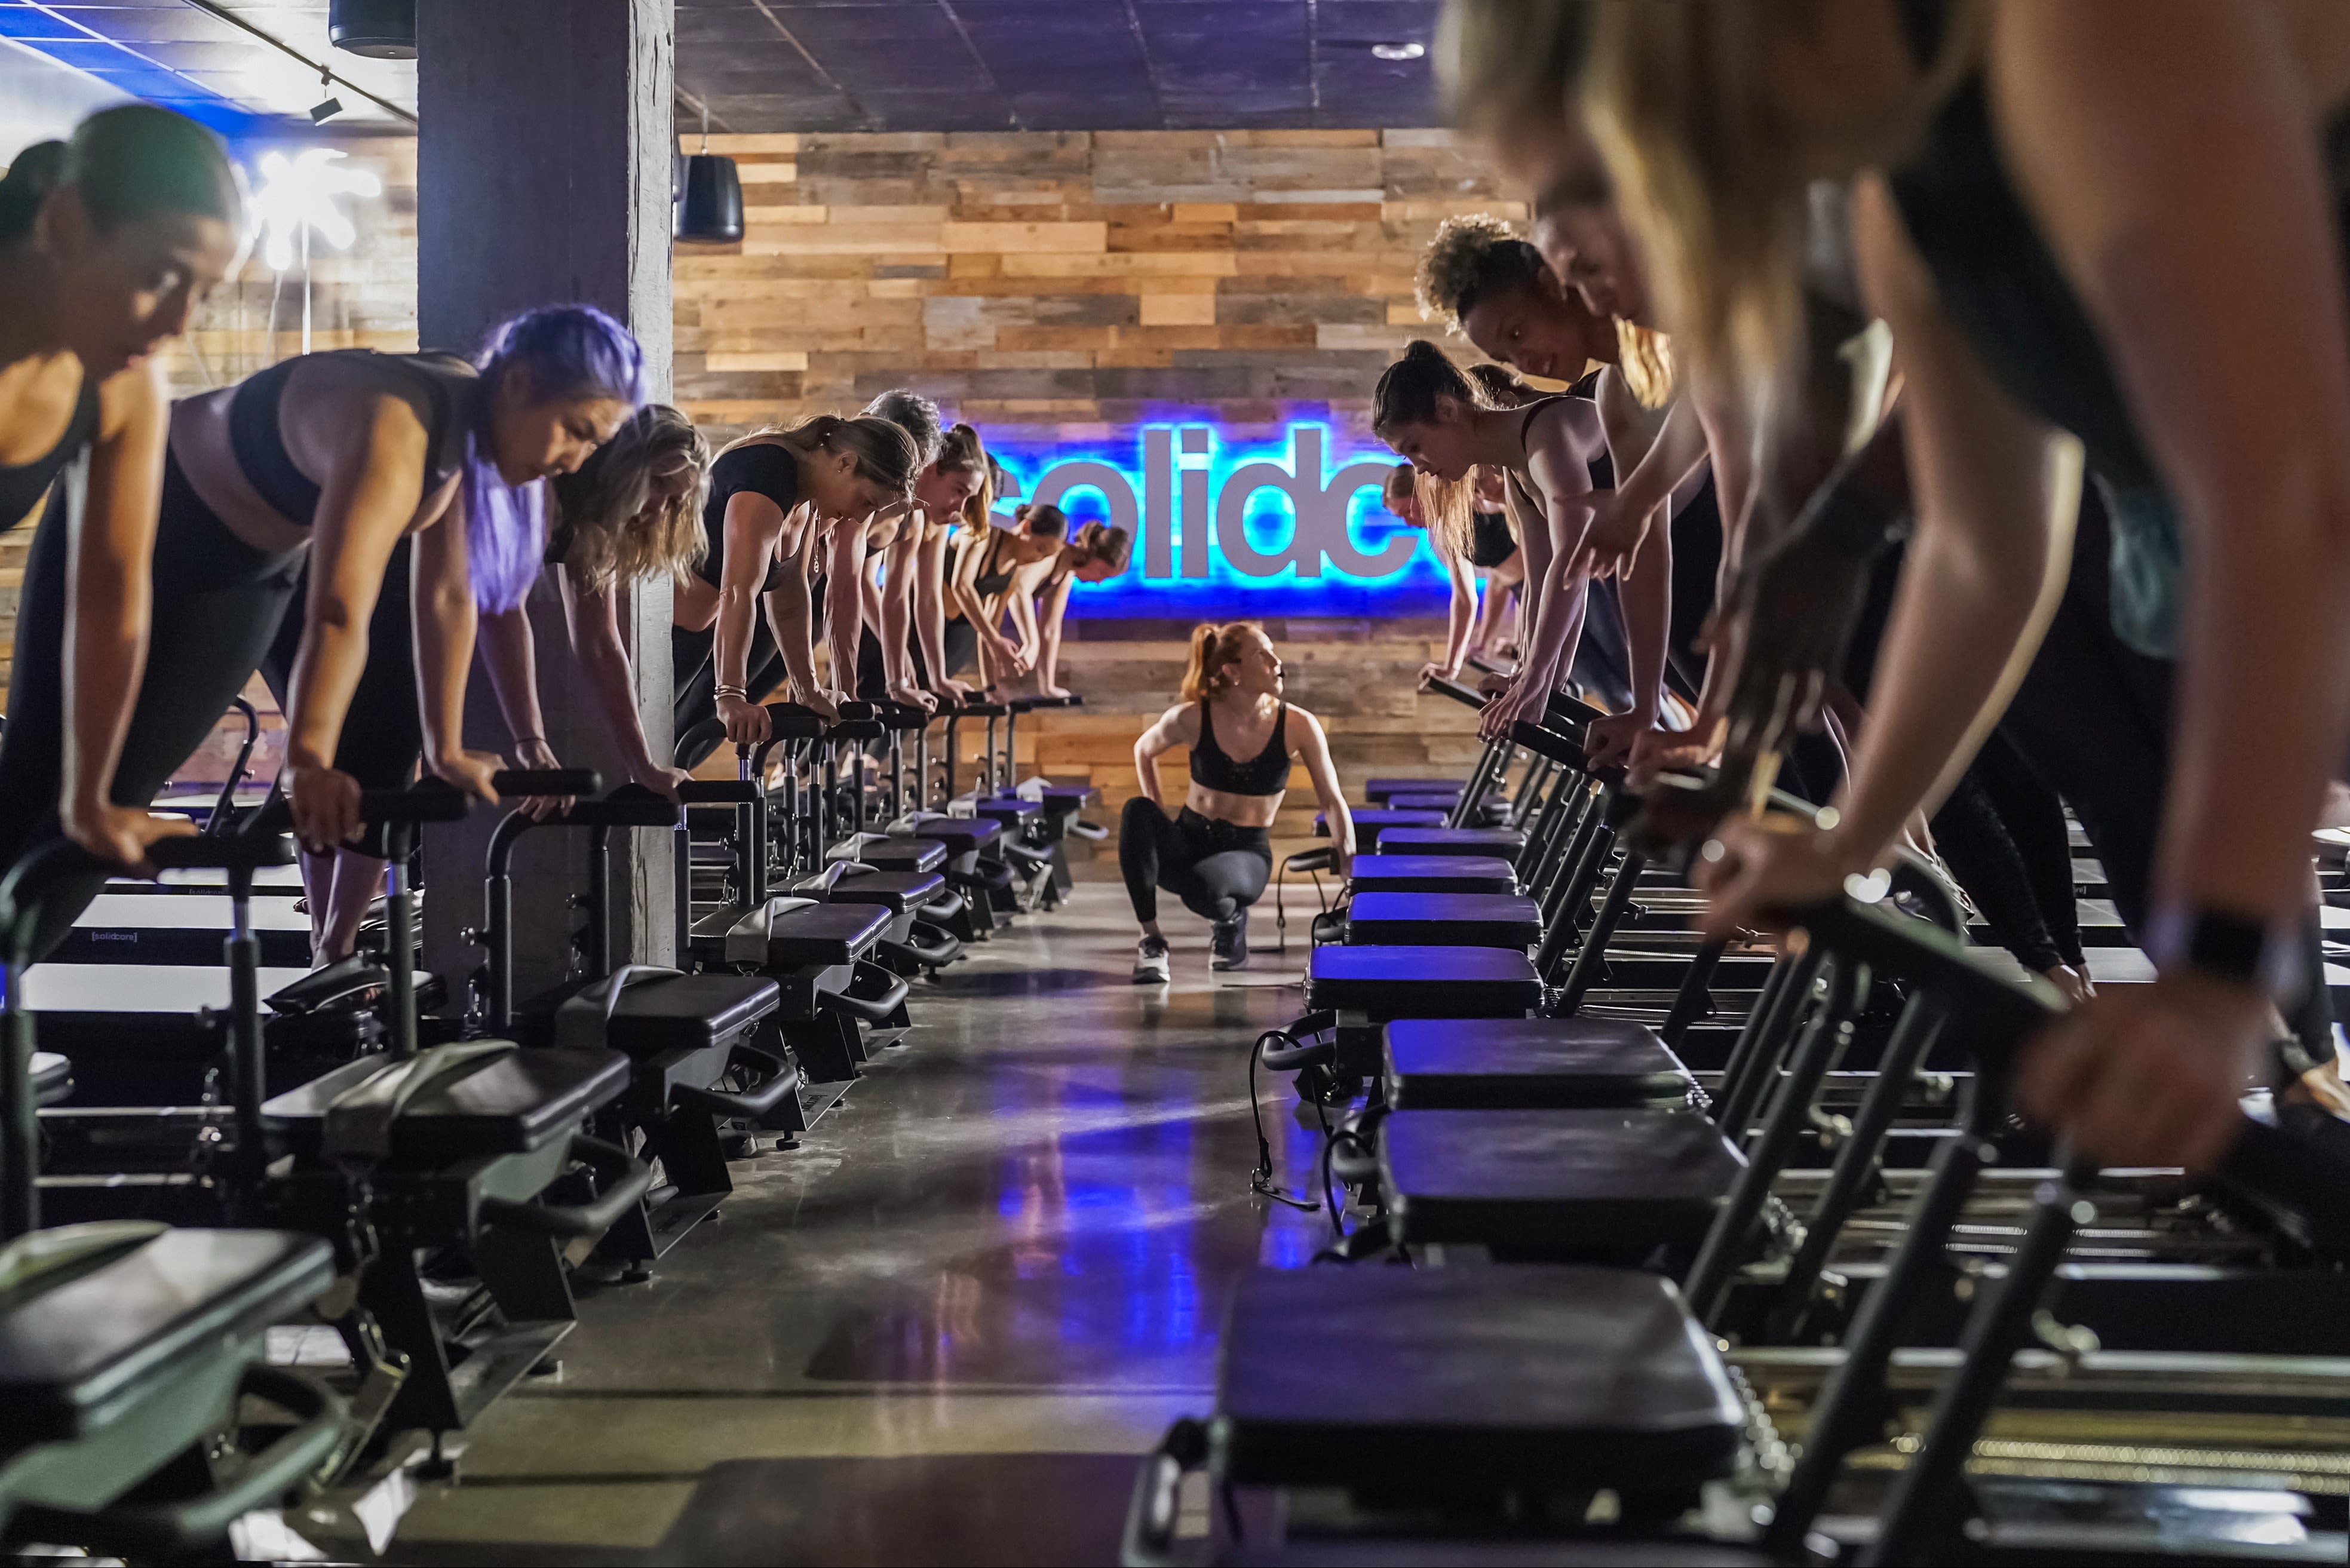 solidcore] - Fed Hill: Read Reviews and Book Classes on ClassPass